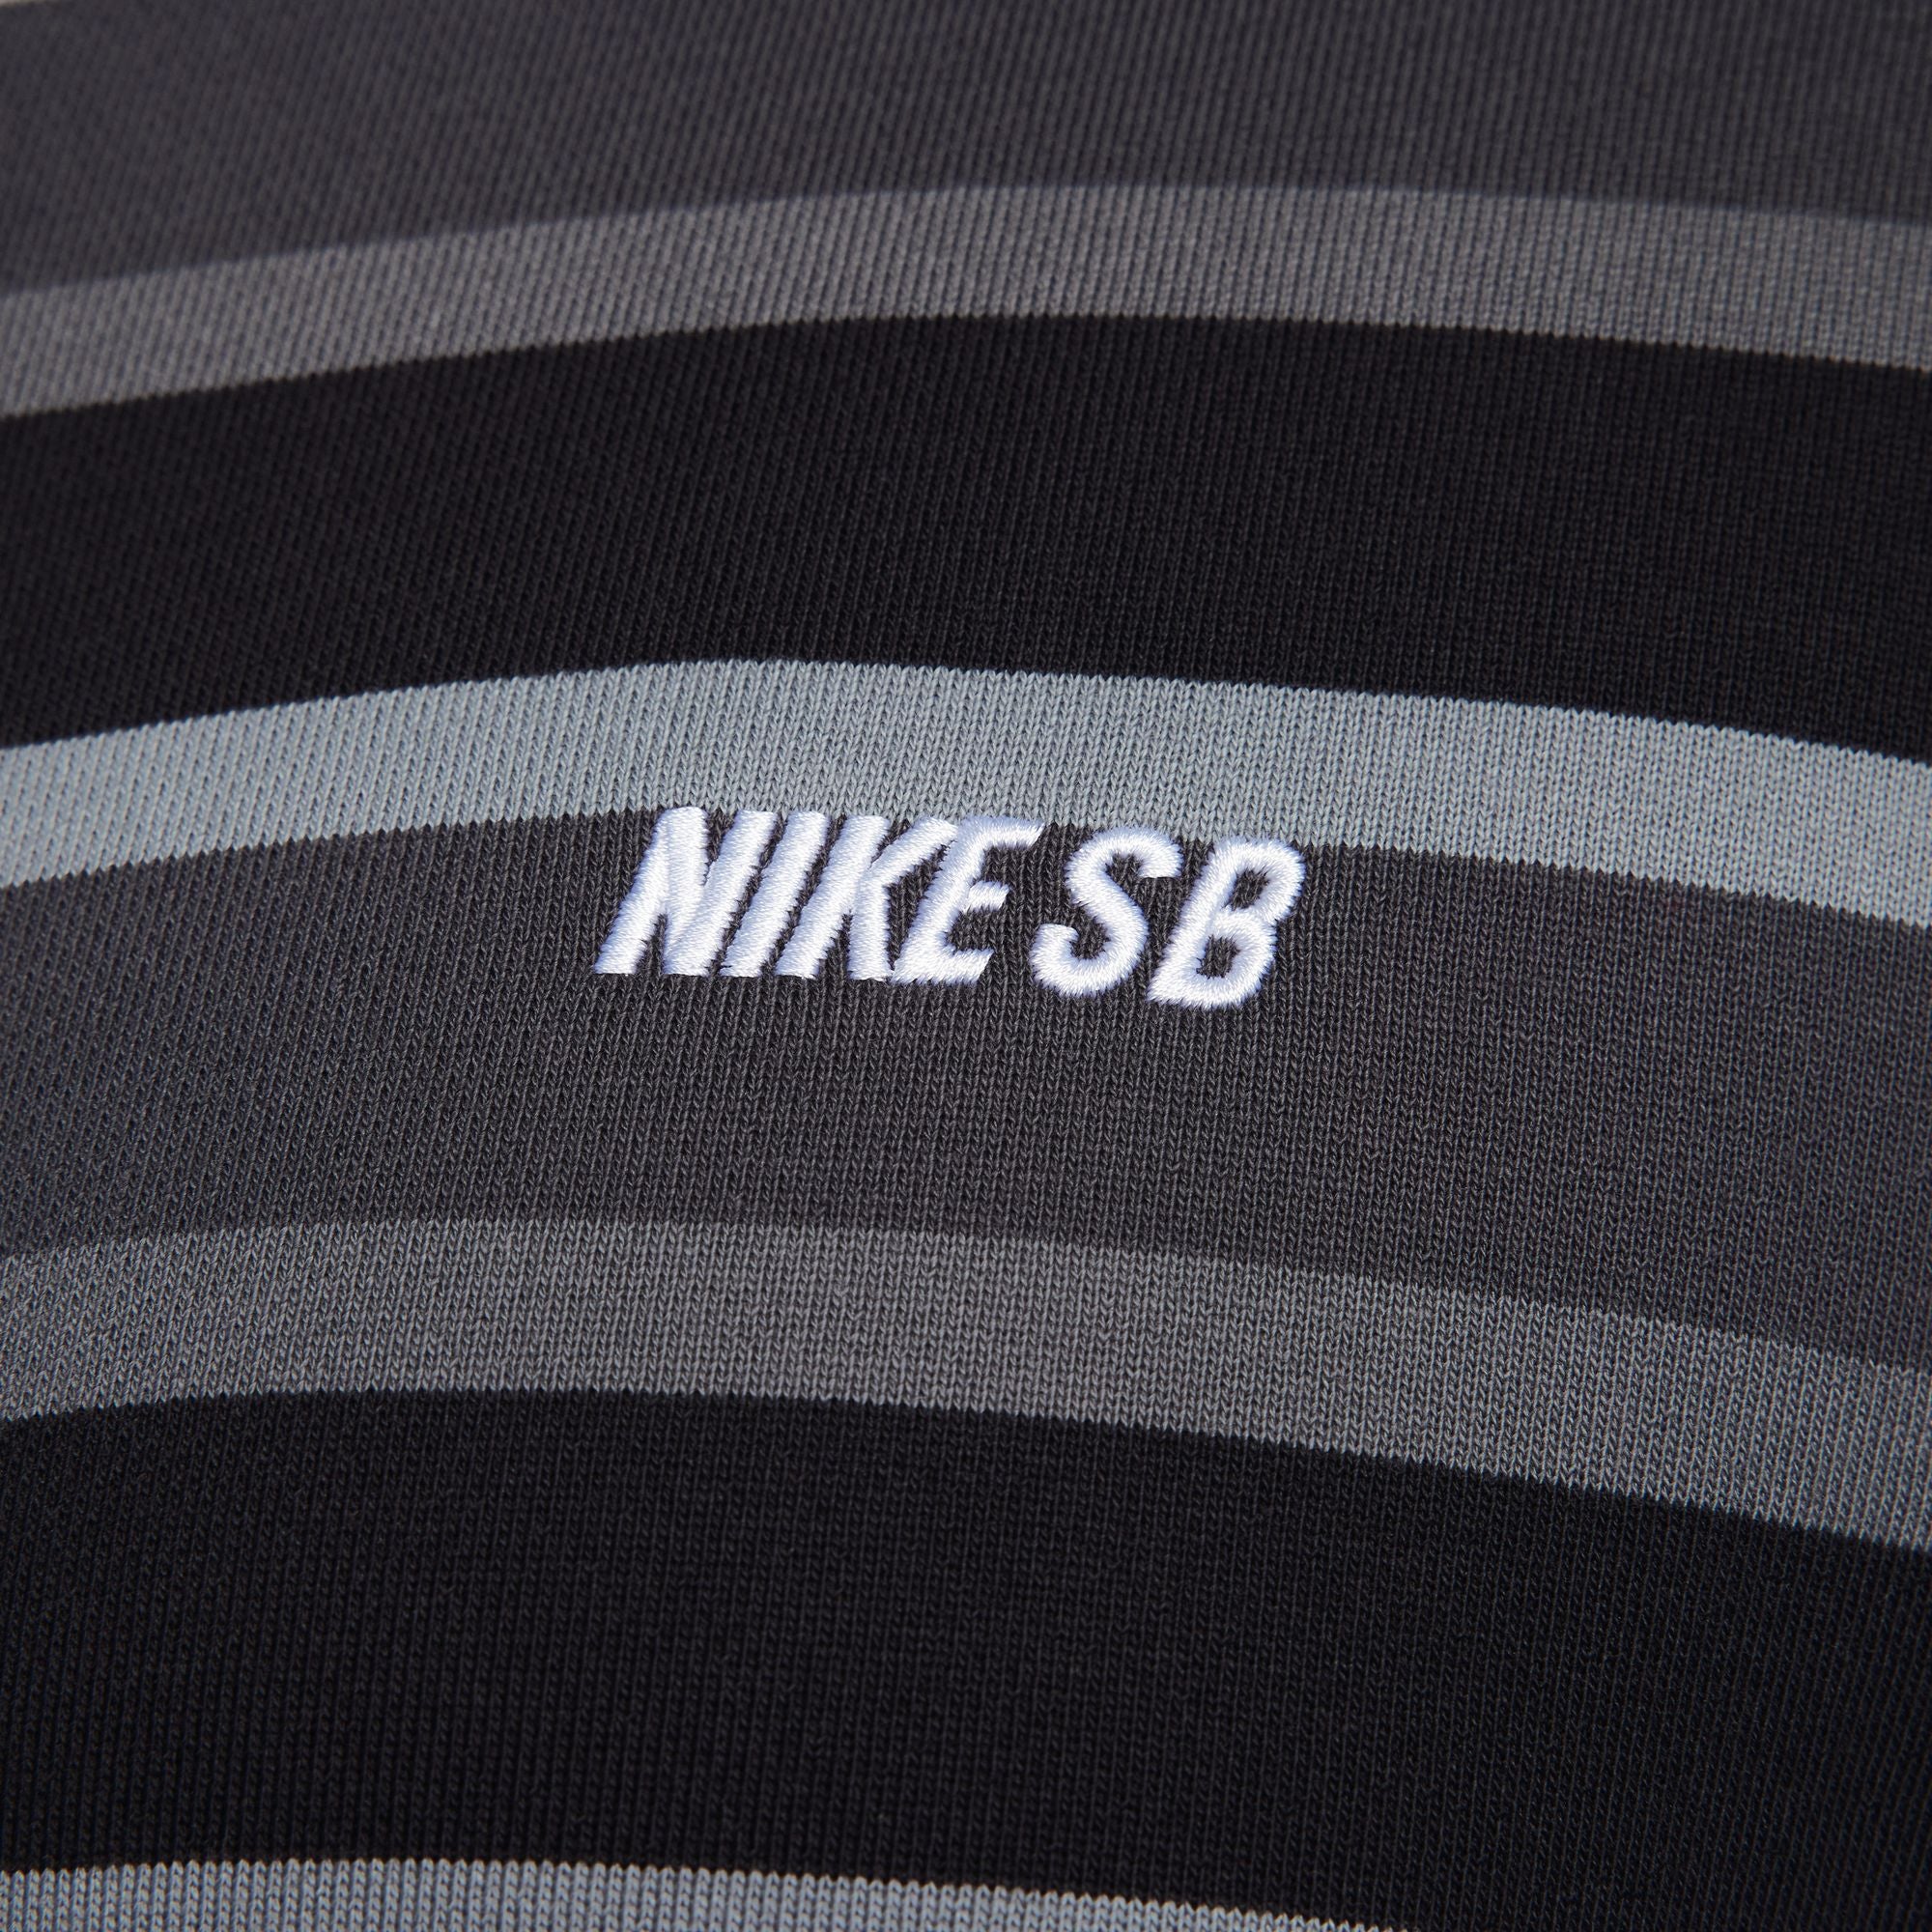 Black and grey striped full zip nike sb hoodie with white nike sb logo on chest. Free uk shipping over £50